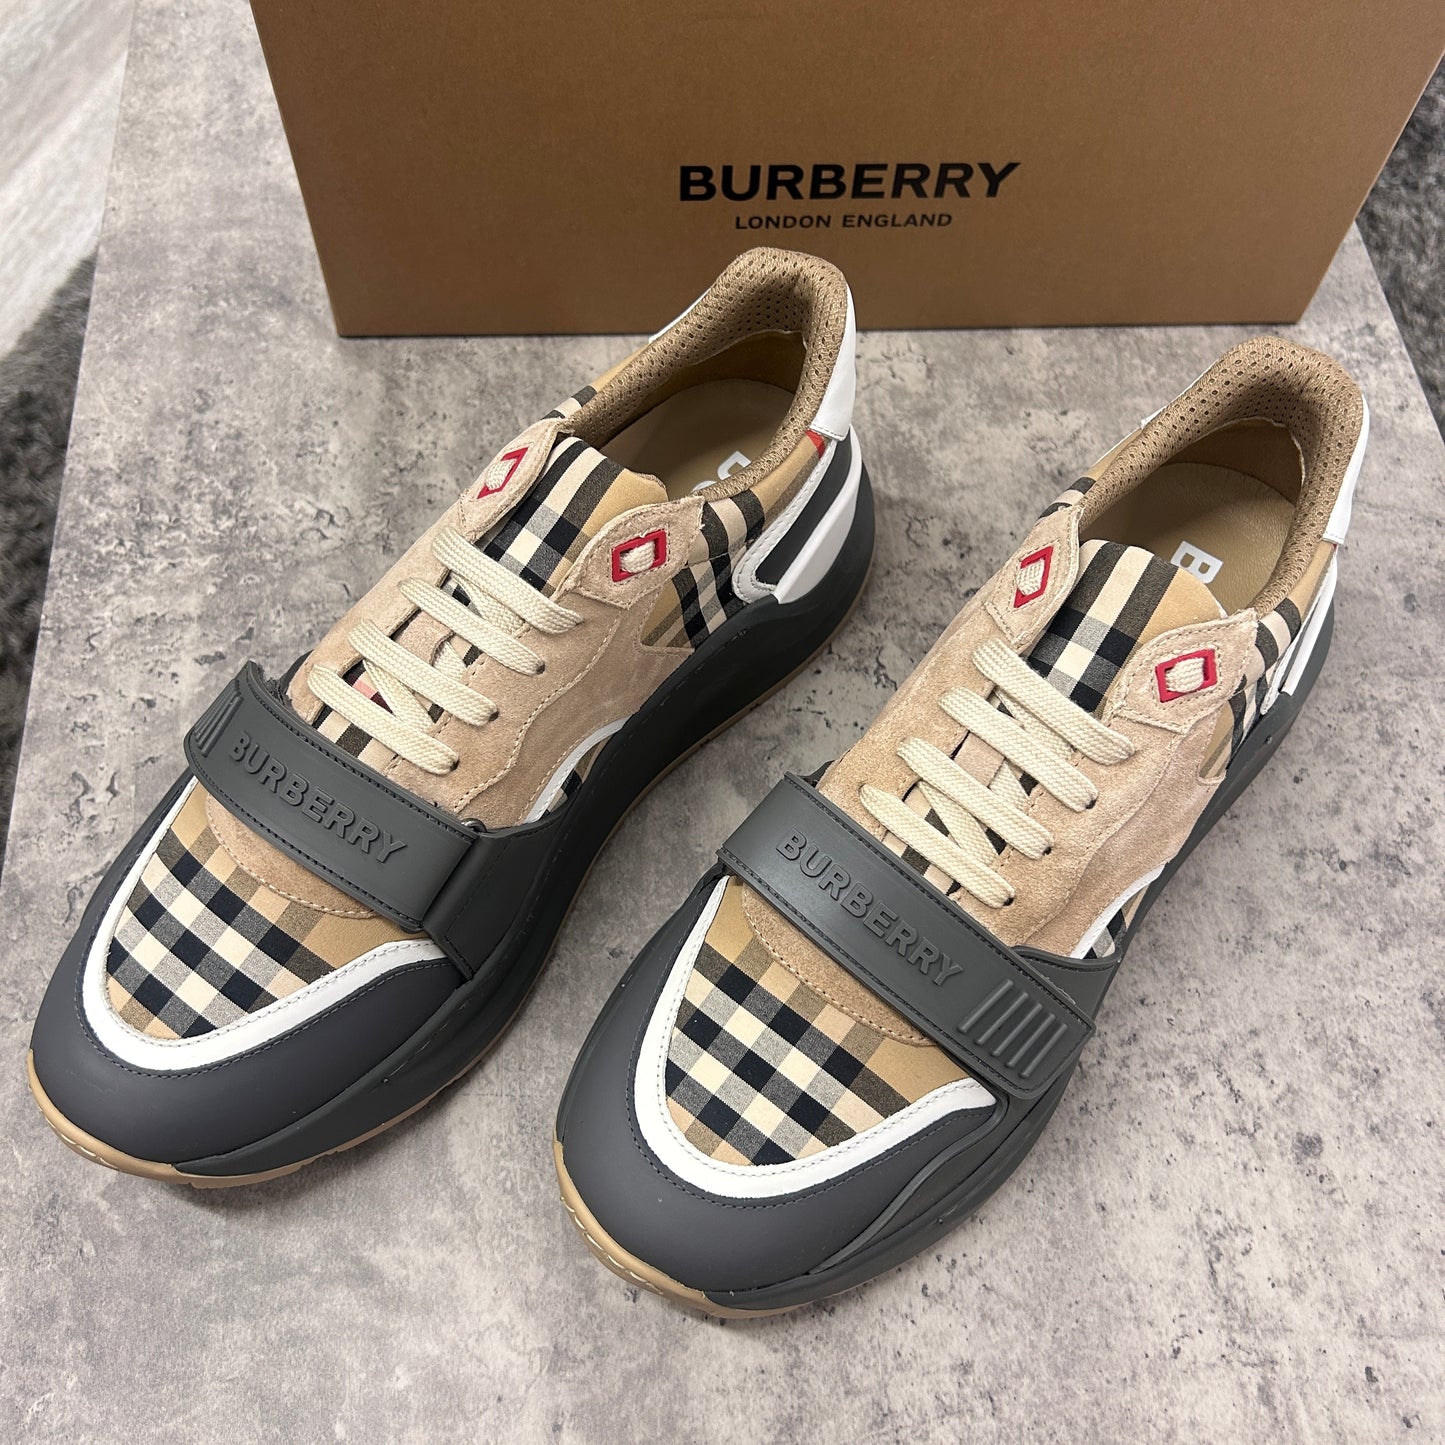 Burberry Men’s Vintage Check, Suede Leather Trainers - UK 10